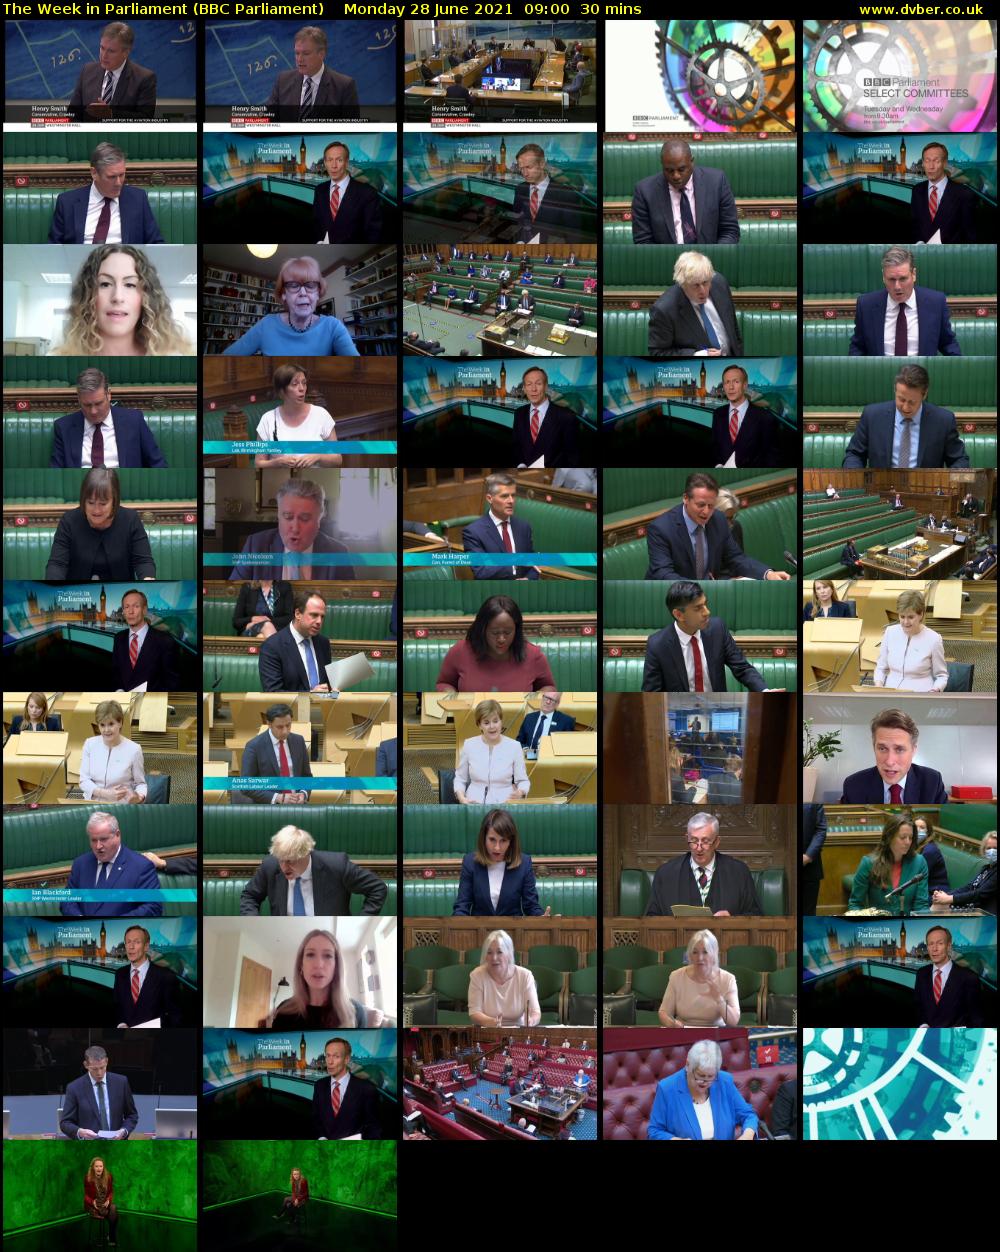 The Week in Parliament (BBC Parliament) Monday 28 June 2021 09:00 - 09:30